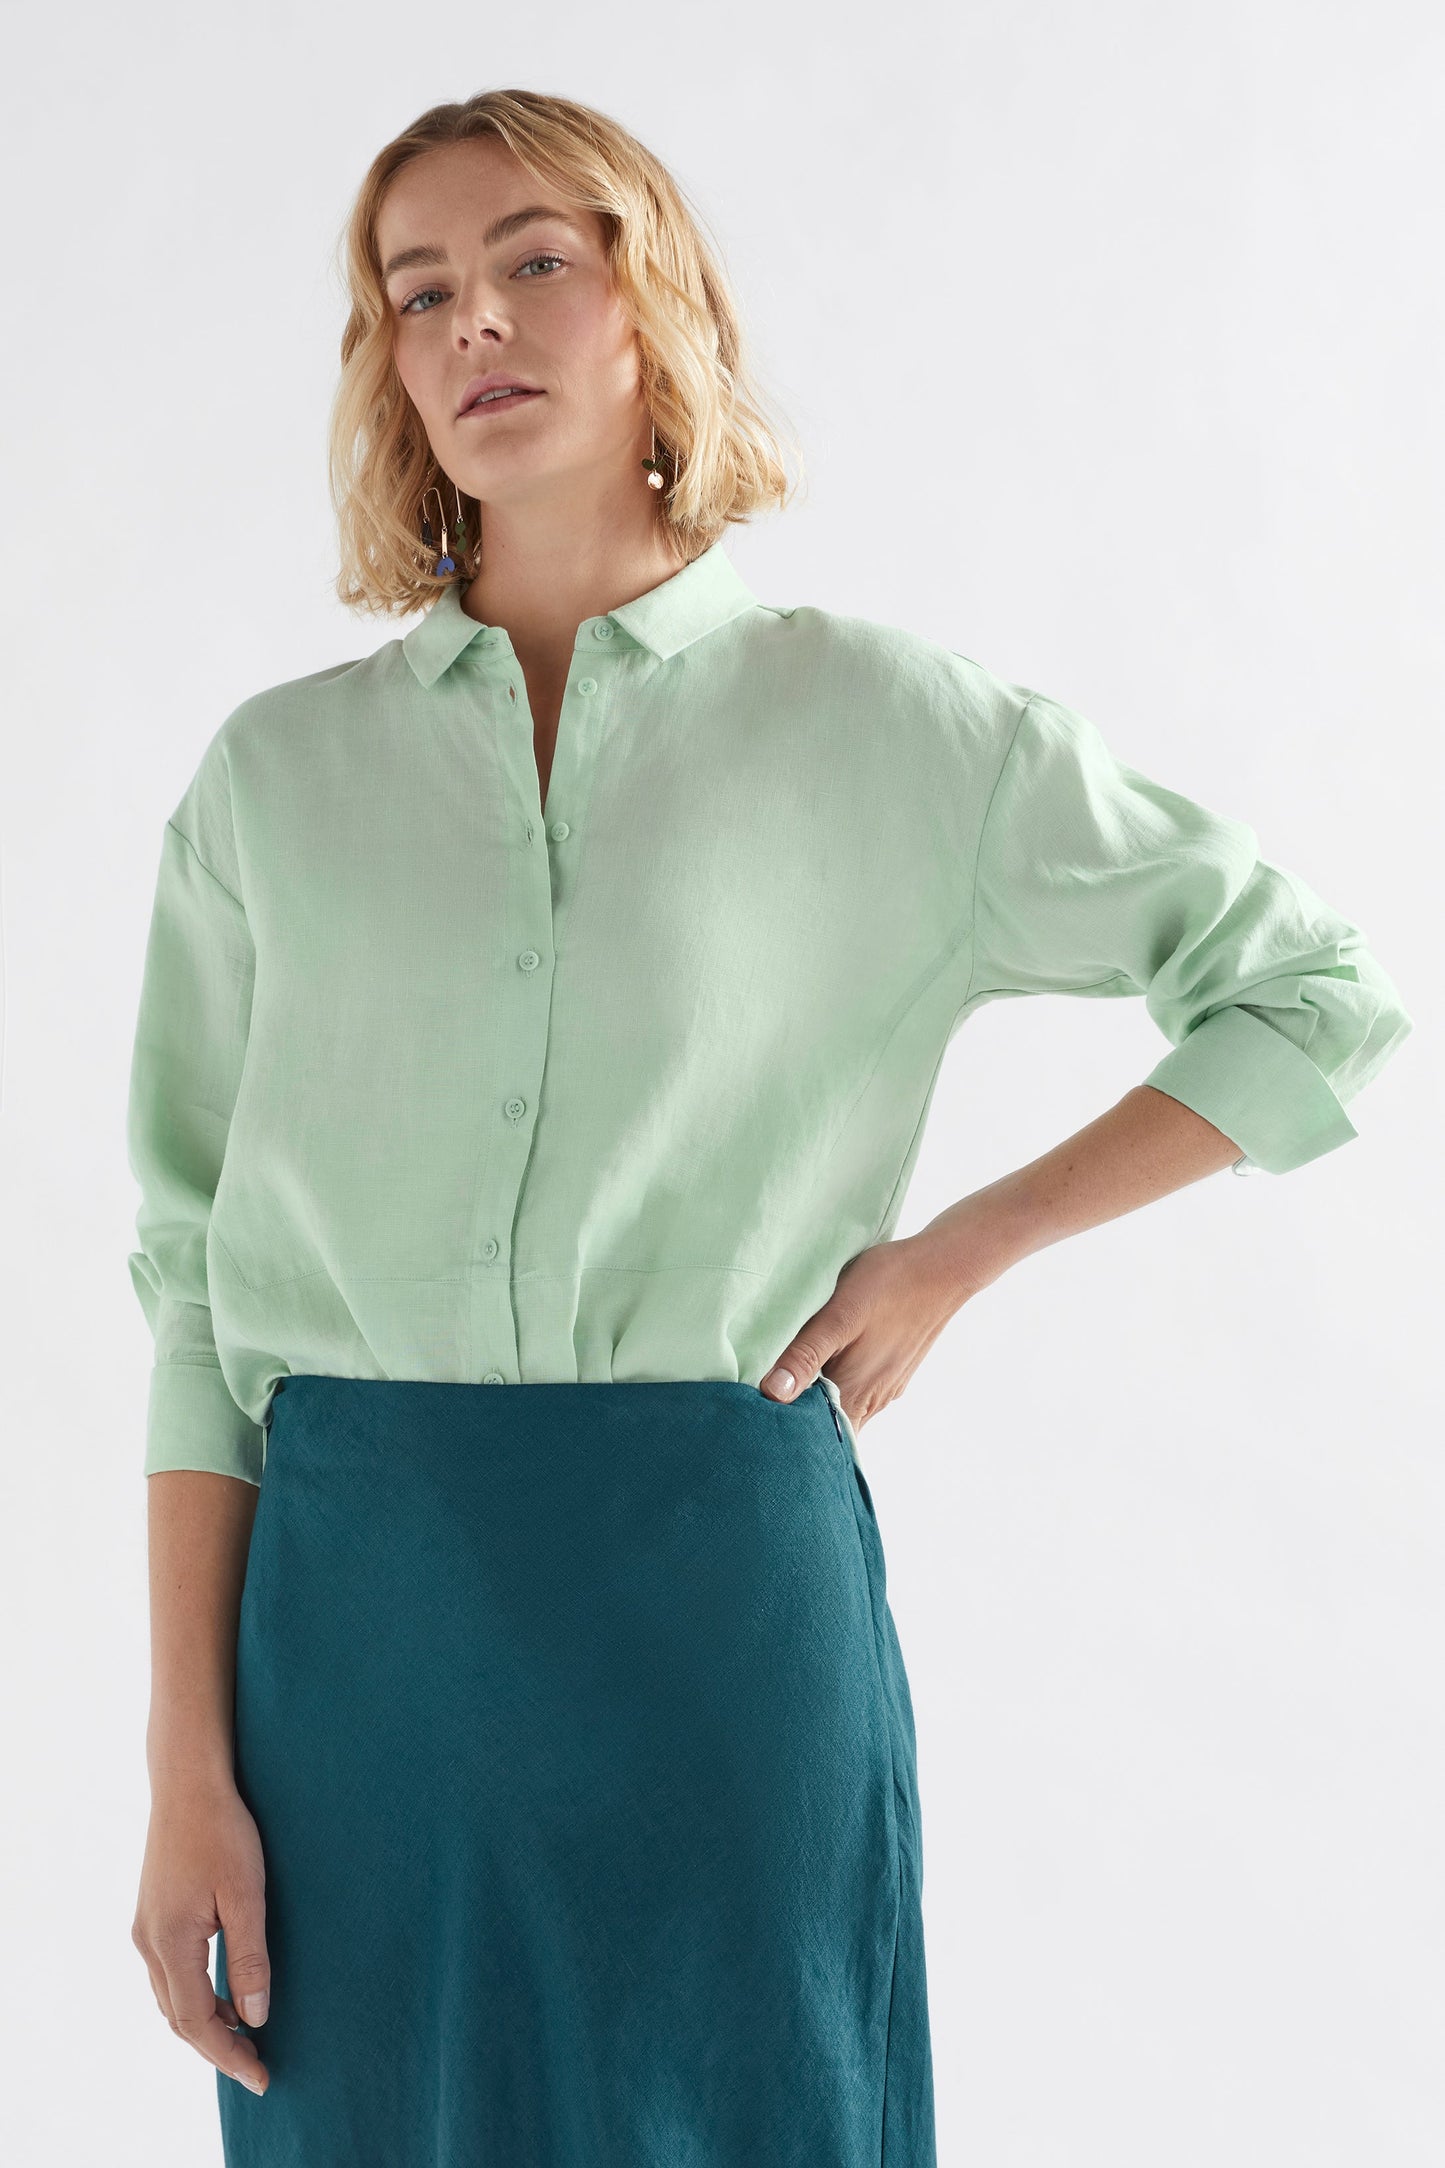 Stilla Linen Shirt with High-Low Hem and Back Pleat Detail Model front| MINT